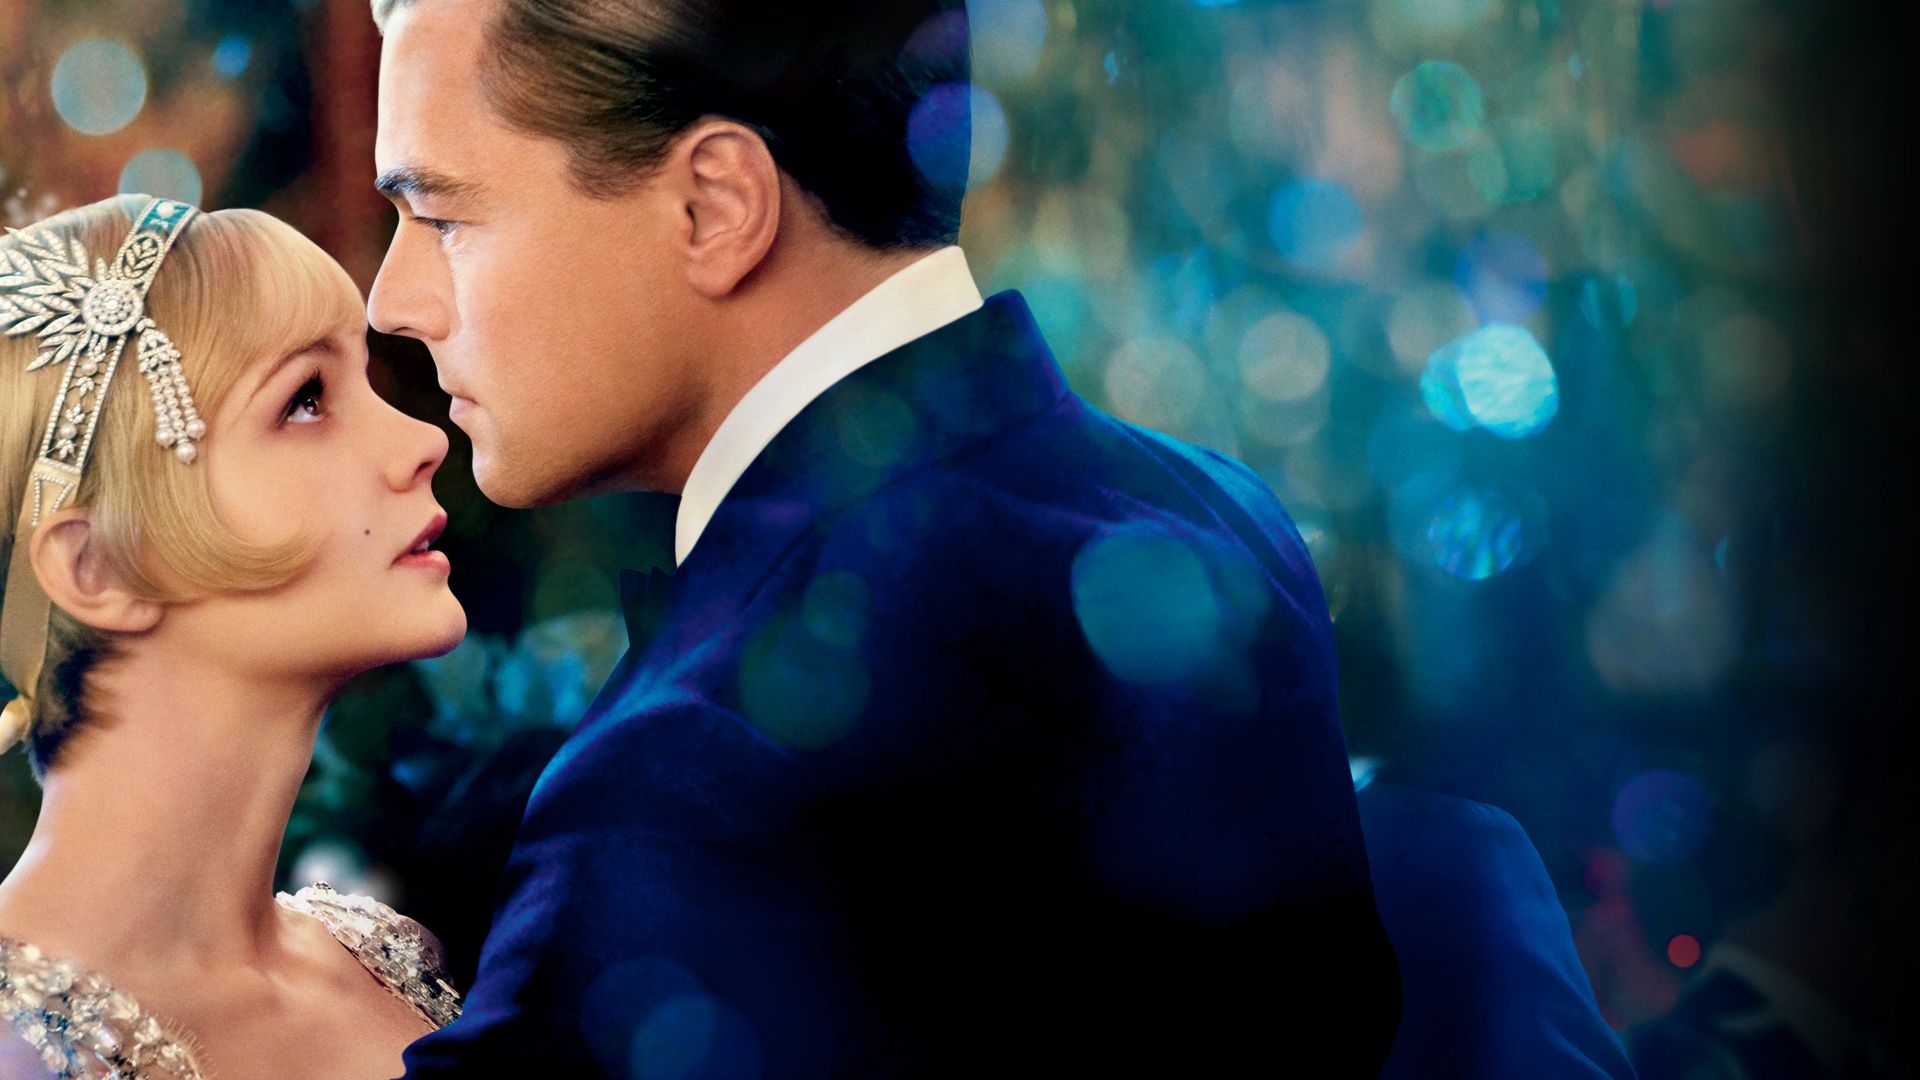 union-films-review-the-great-gatsby